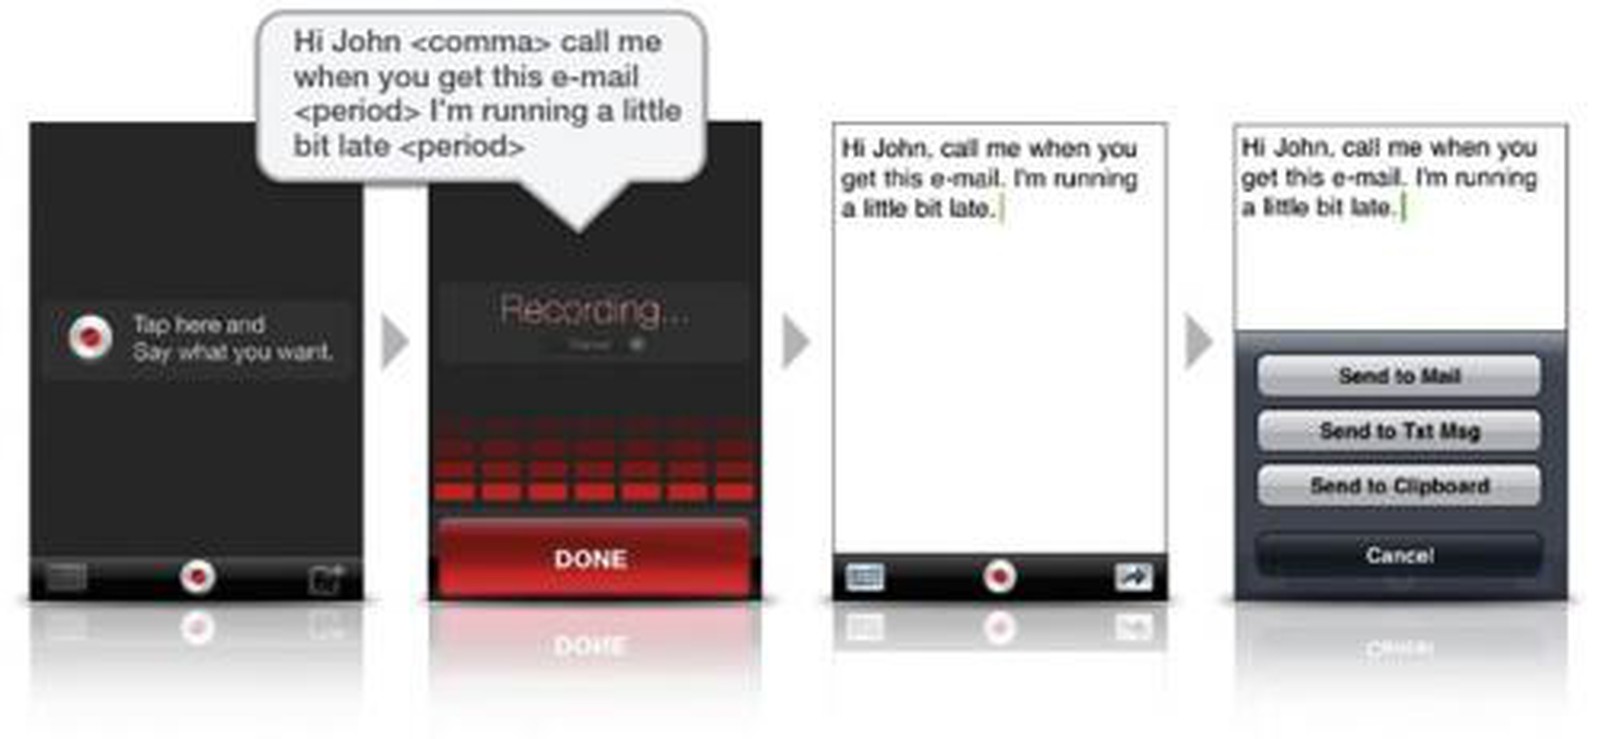 how to use apple dictation on iphone